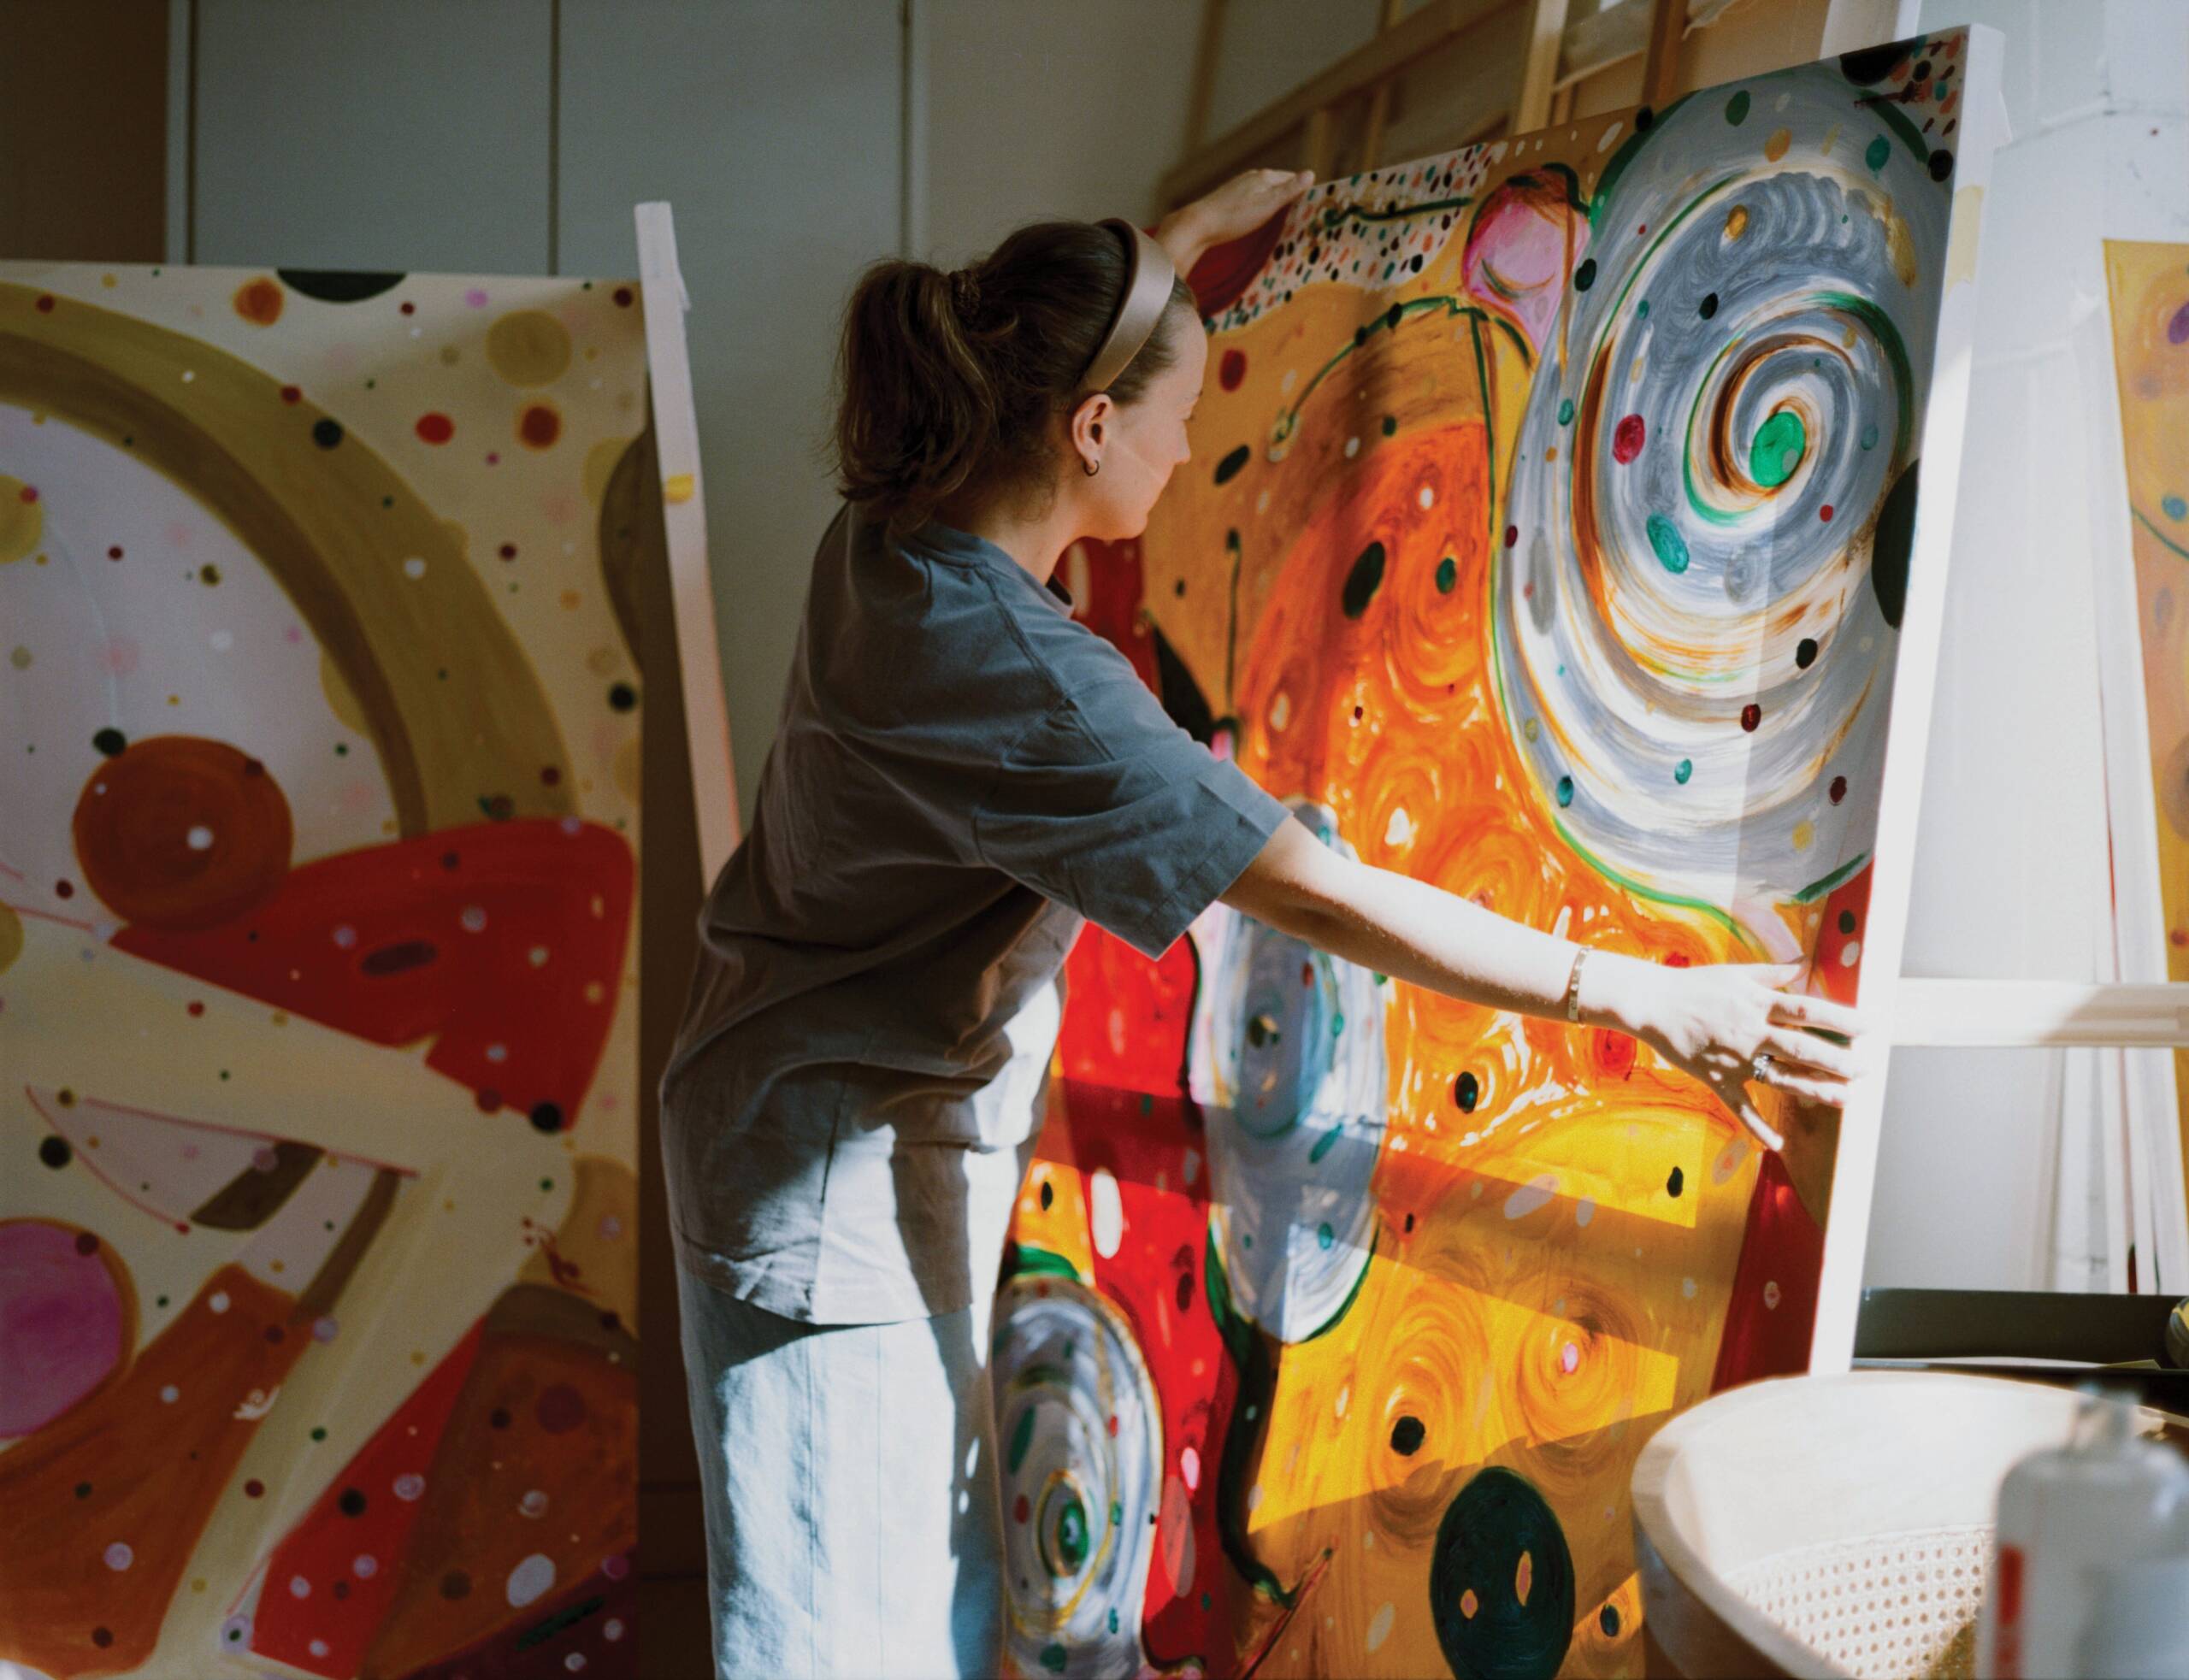 Woman that is painting, holding colourful painting up